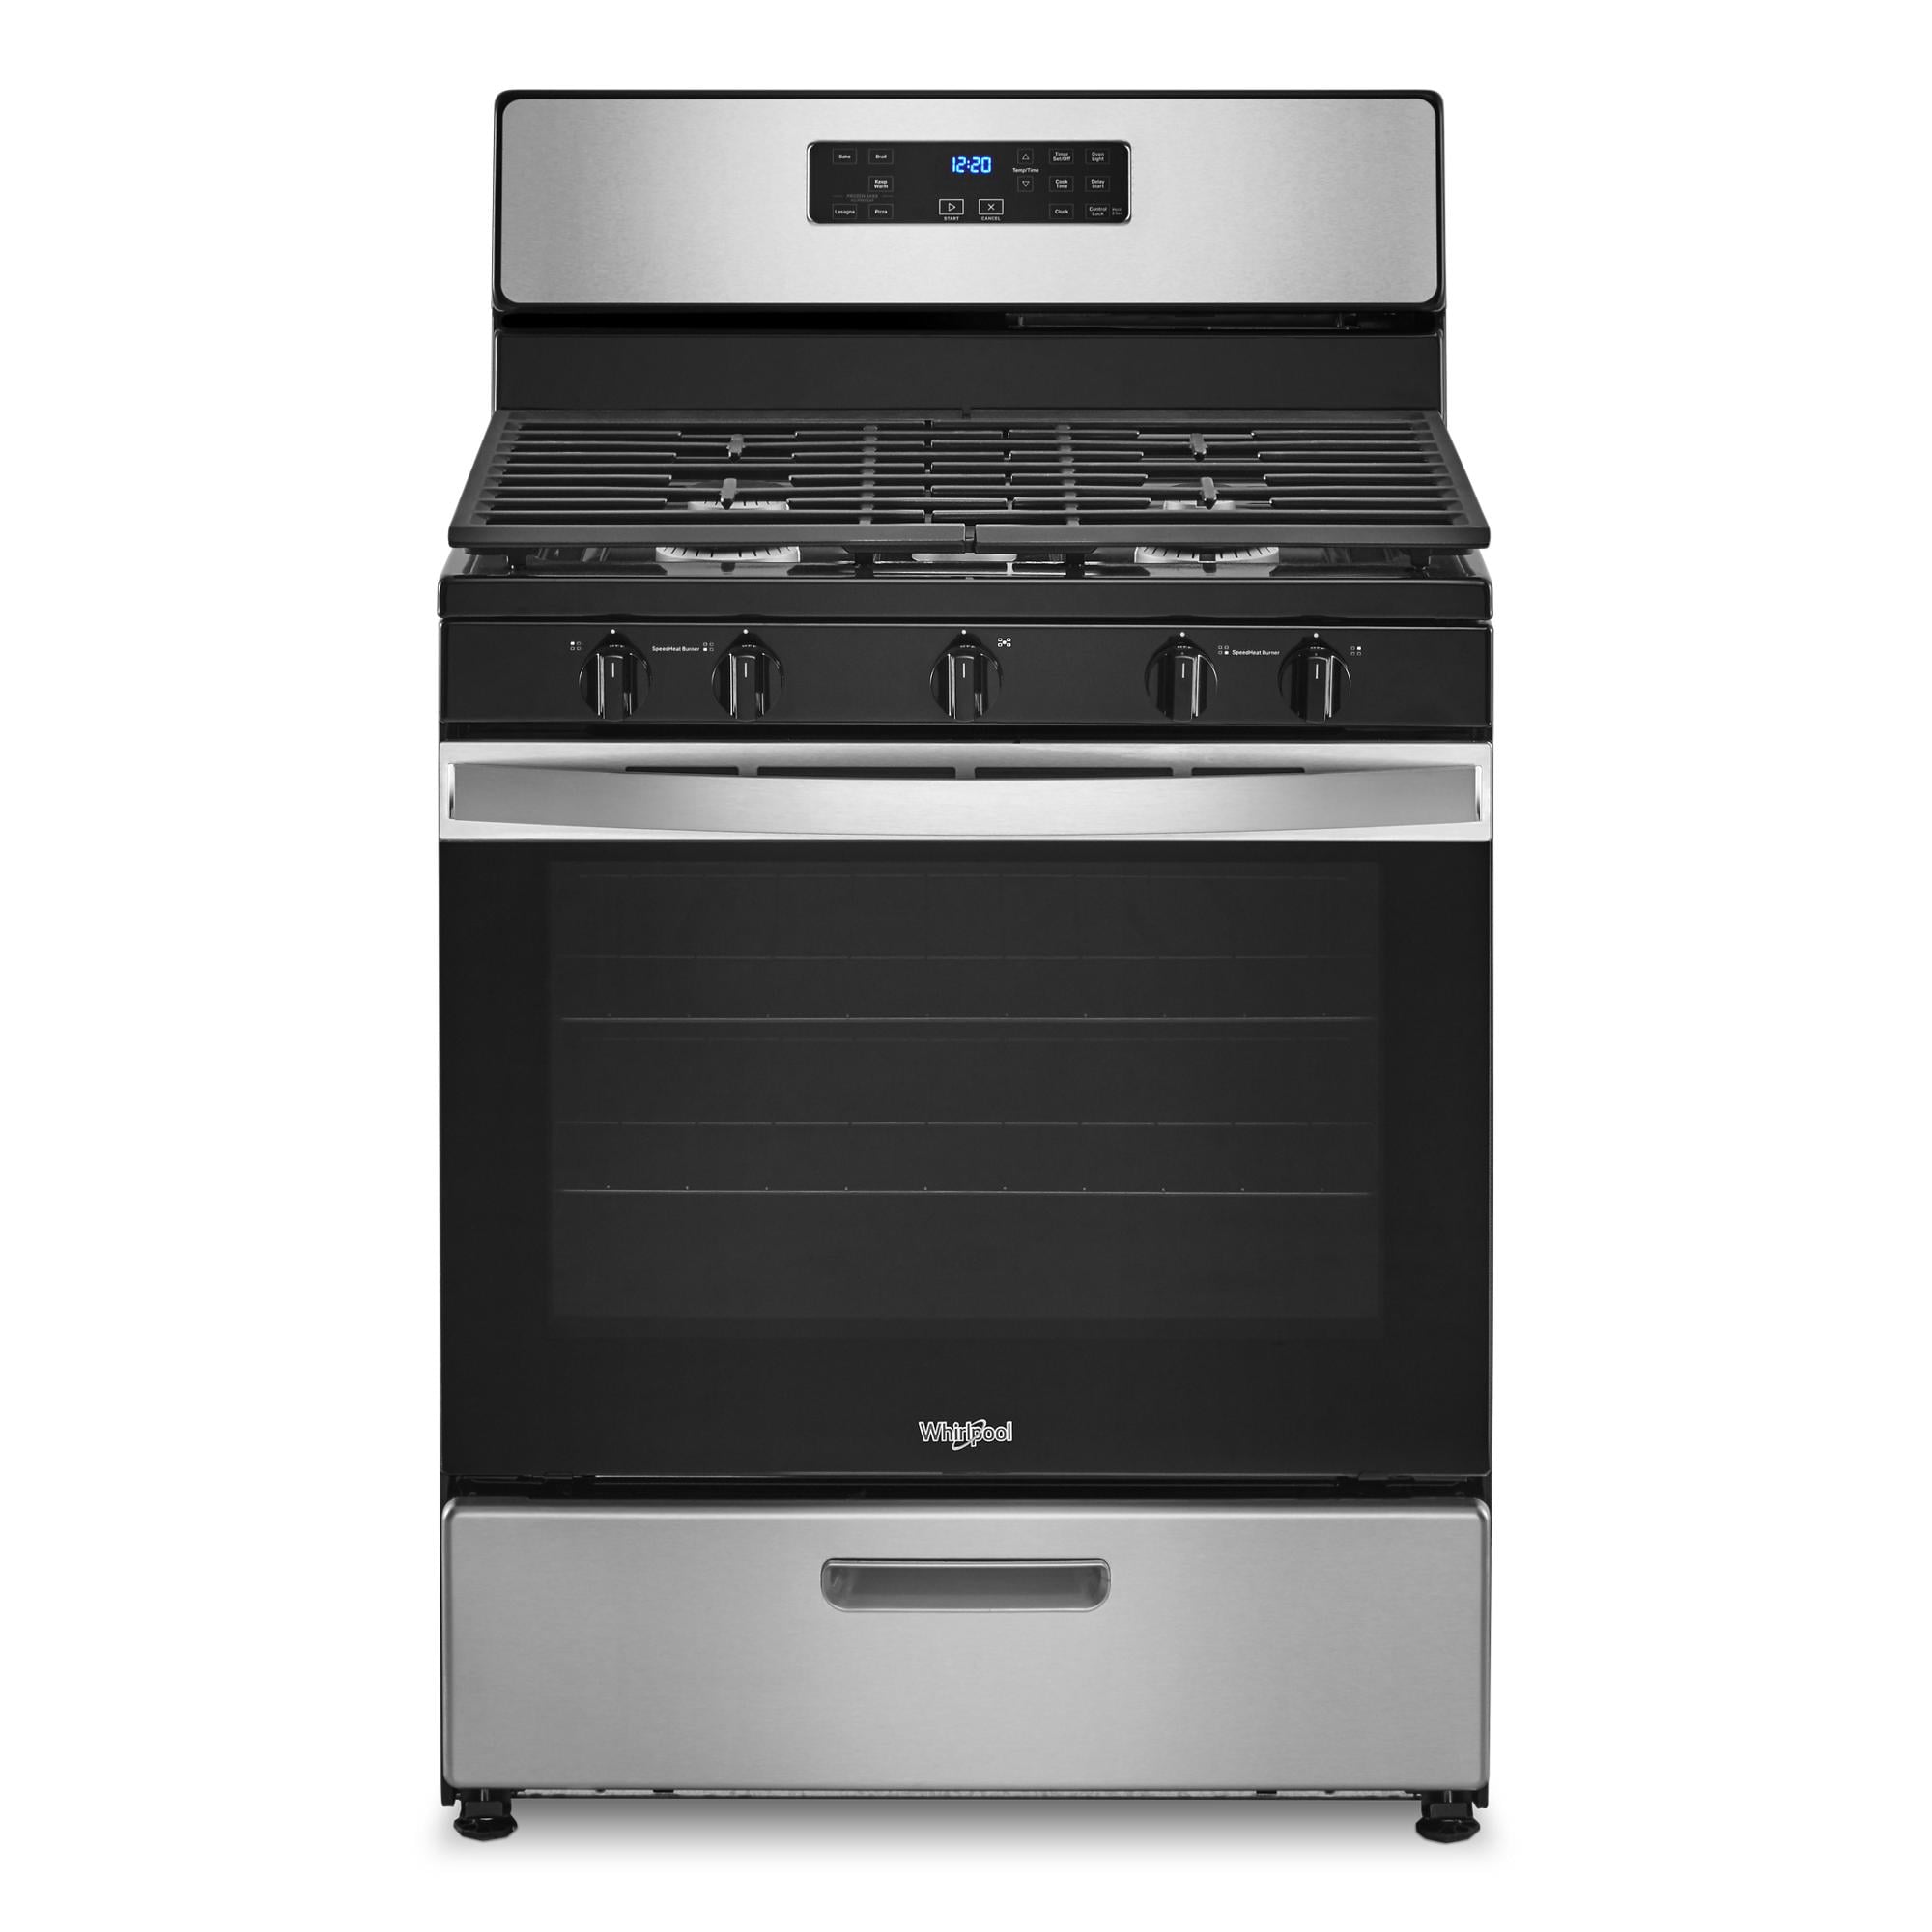 Whirlpool 30 in. Gas Cooktop in Stainless Steel with 5 Burners and